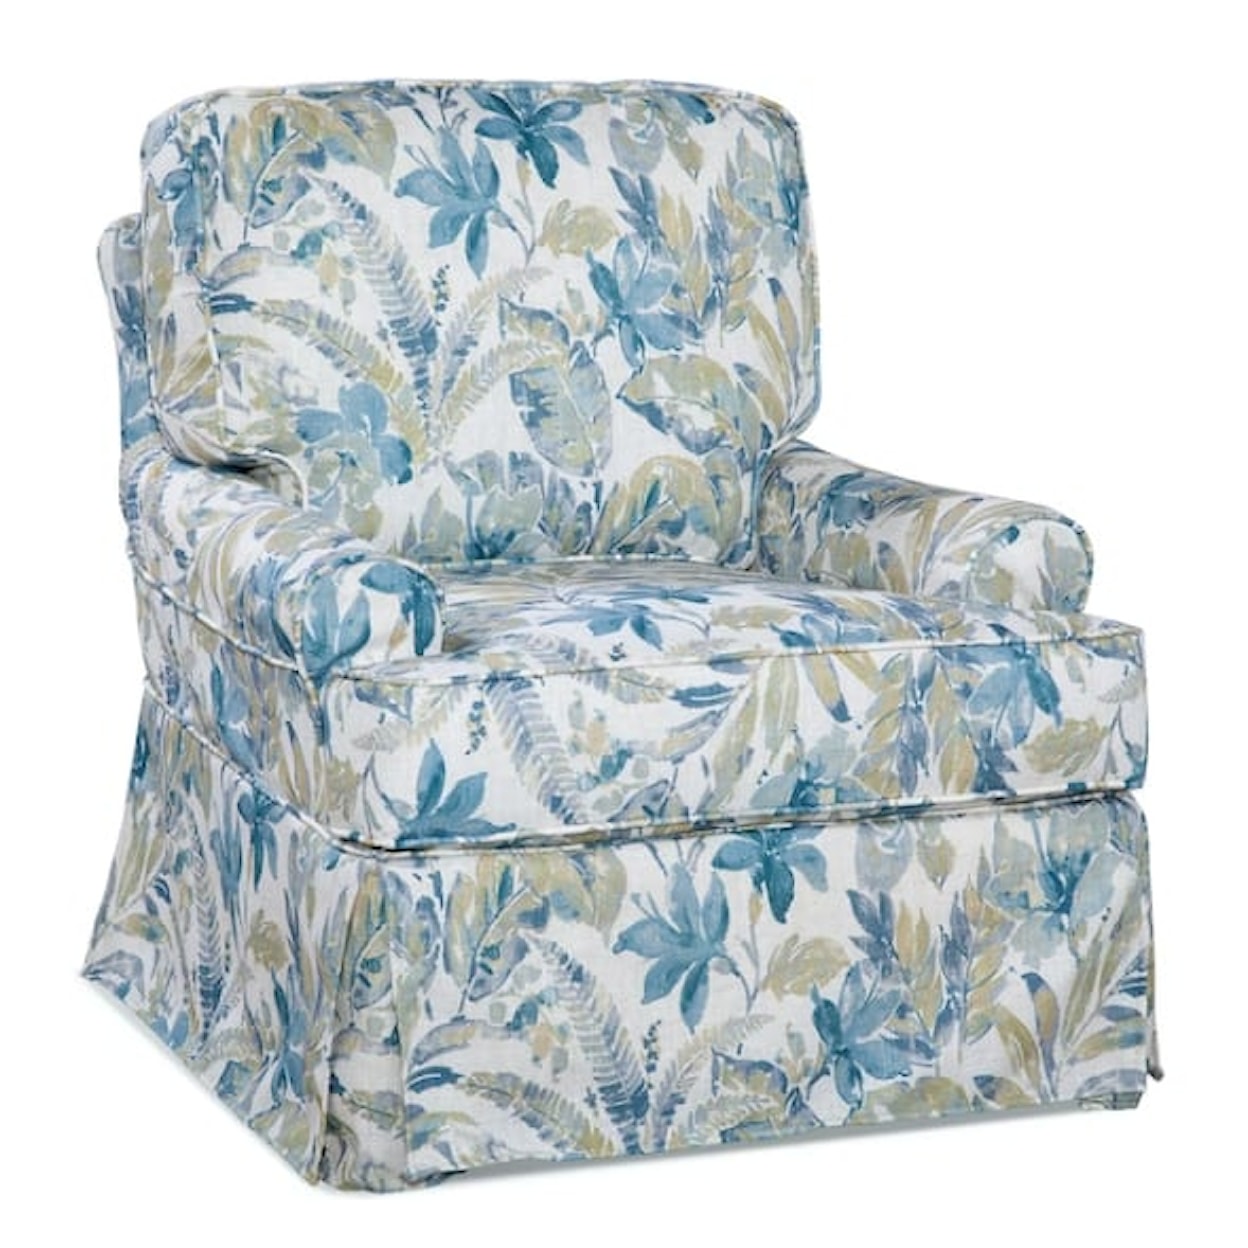 Braxton Culler Accent Chairs Belmont Slipcover Swivel Glider